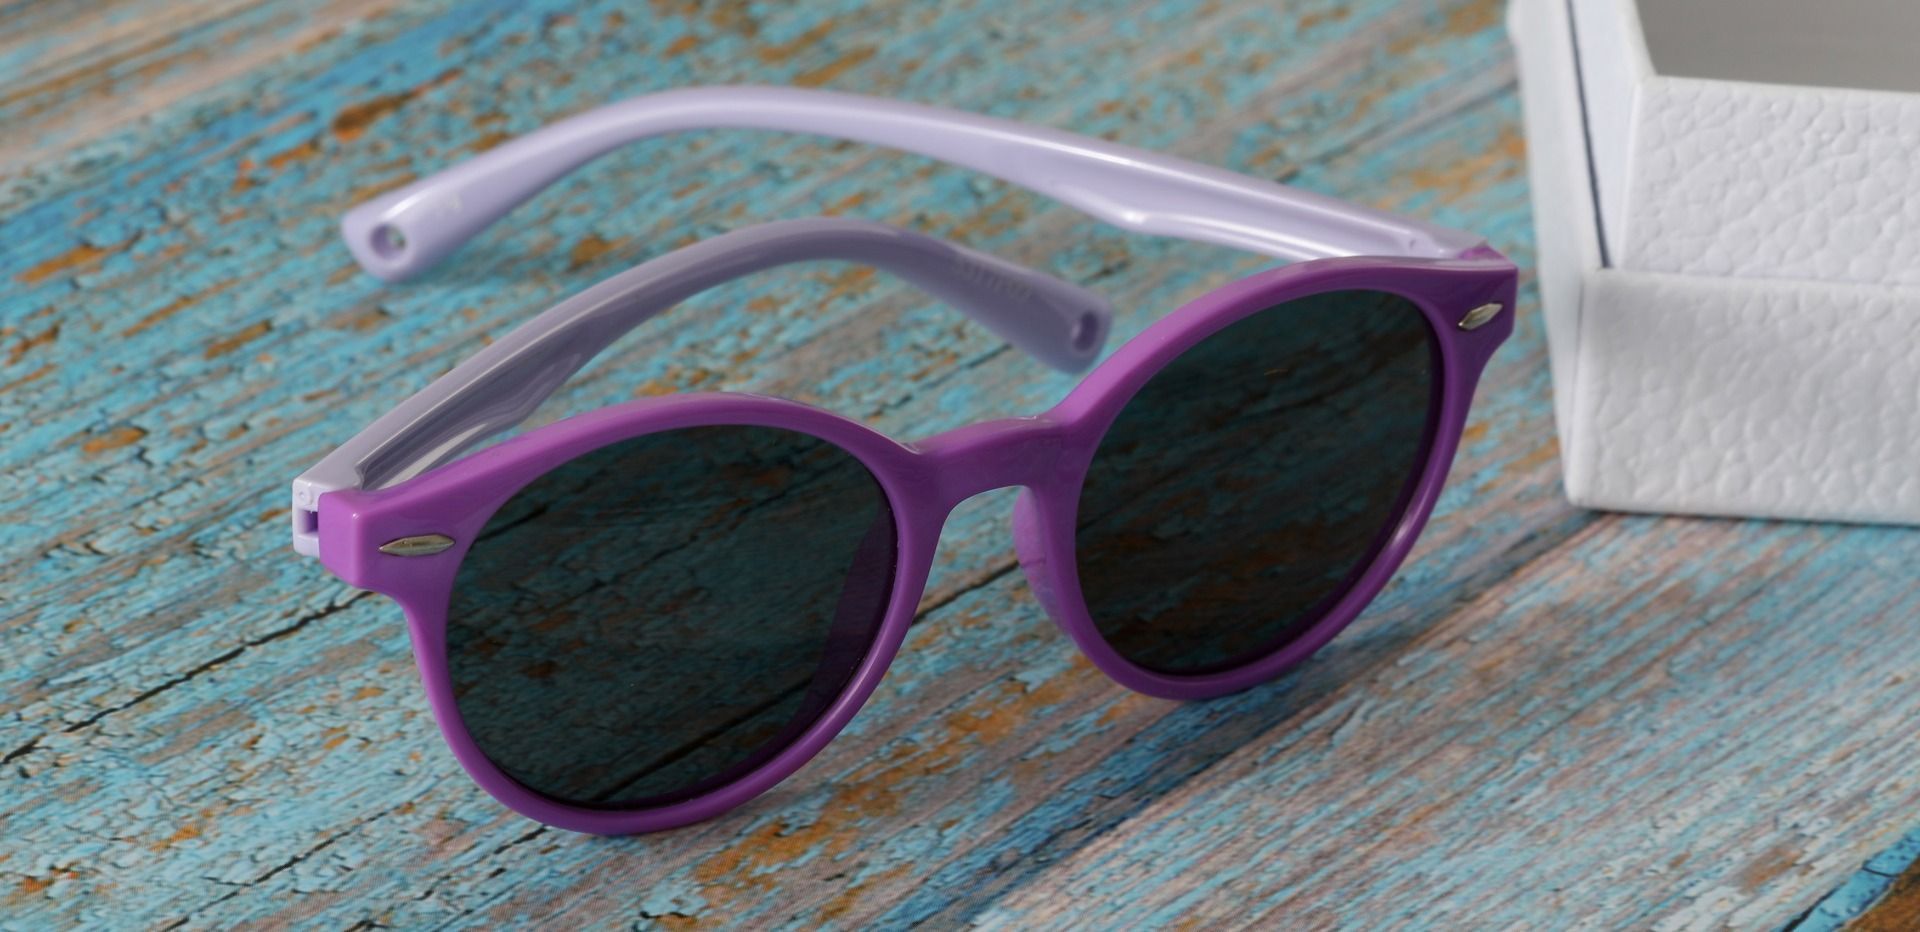 Harris Round Single Vision Sunglasses - Purple Frame With Gray Lenses